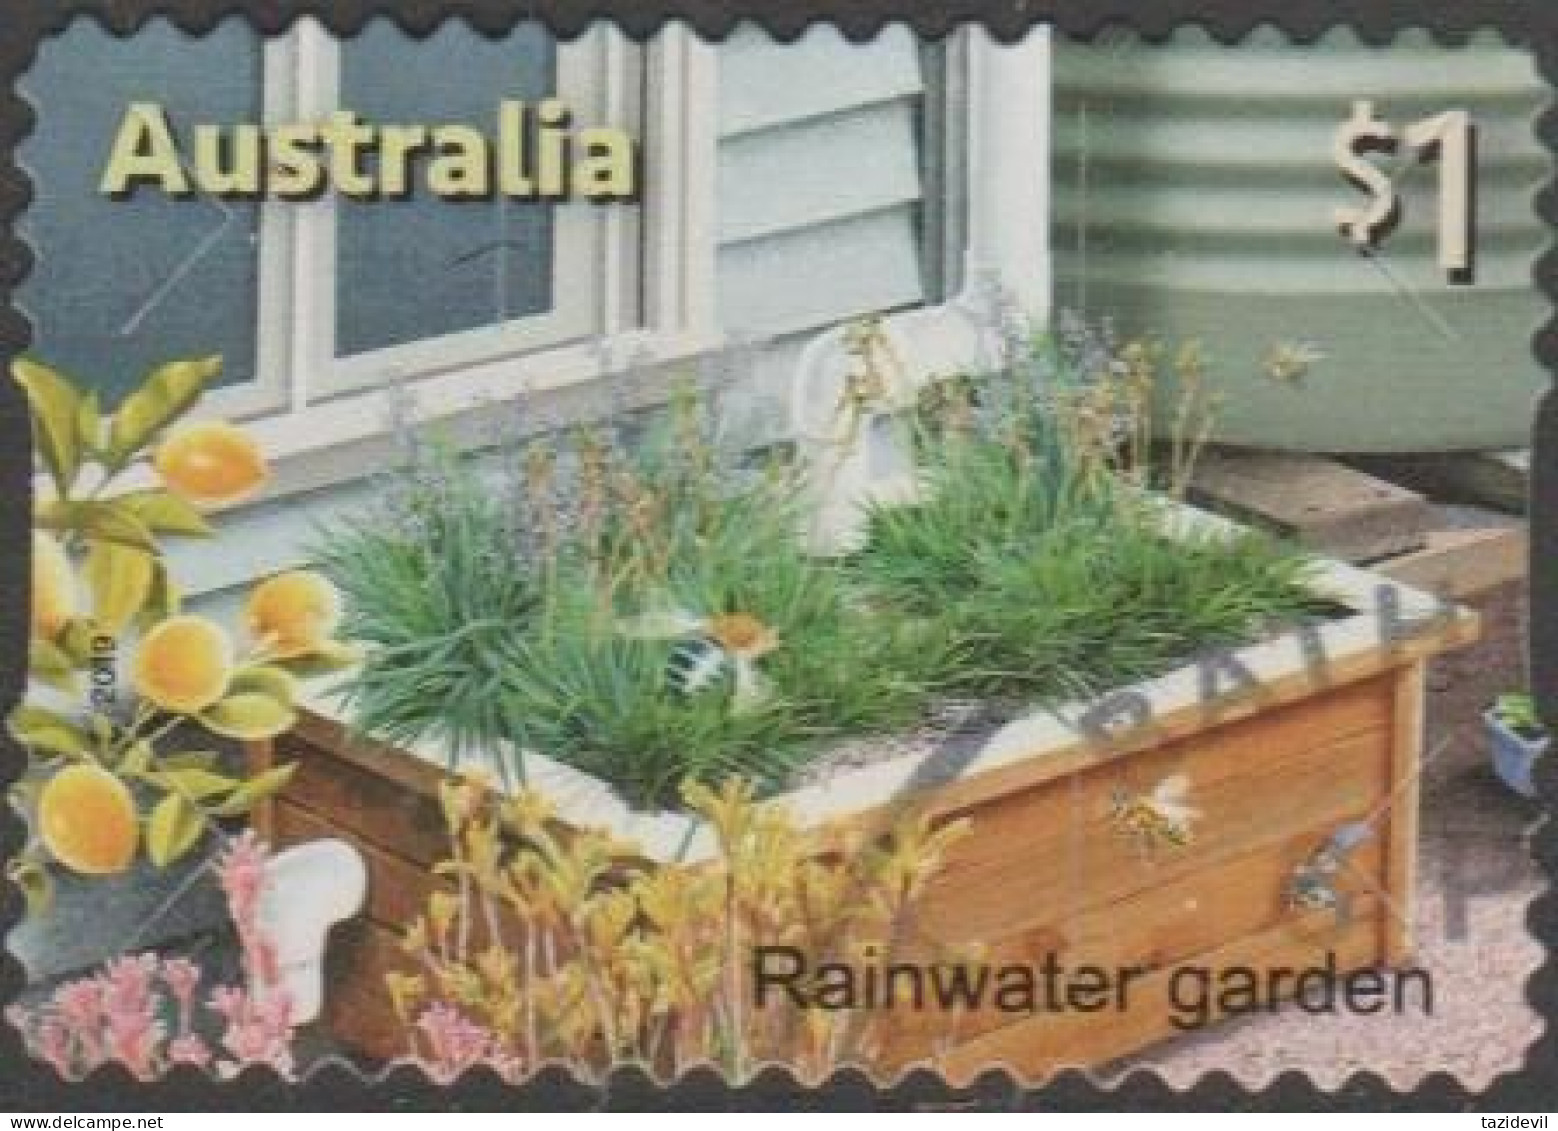 AUSTRALIA - DIE-CUT-USED 2019 $1.00 Stamp Collecting Month- In The Garden - Rainwater Garden - Used Stamps